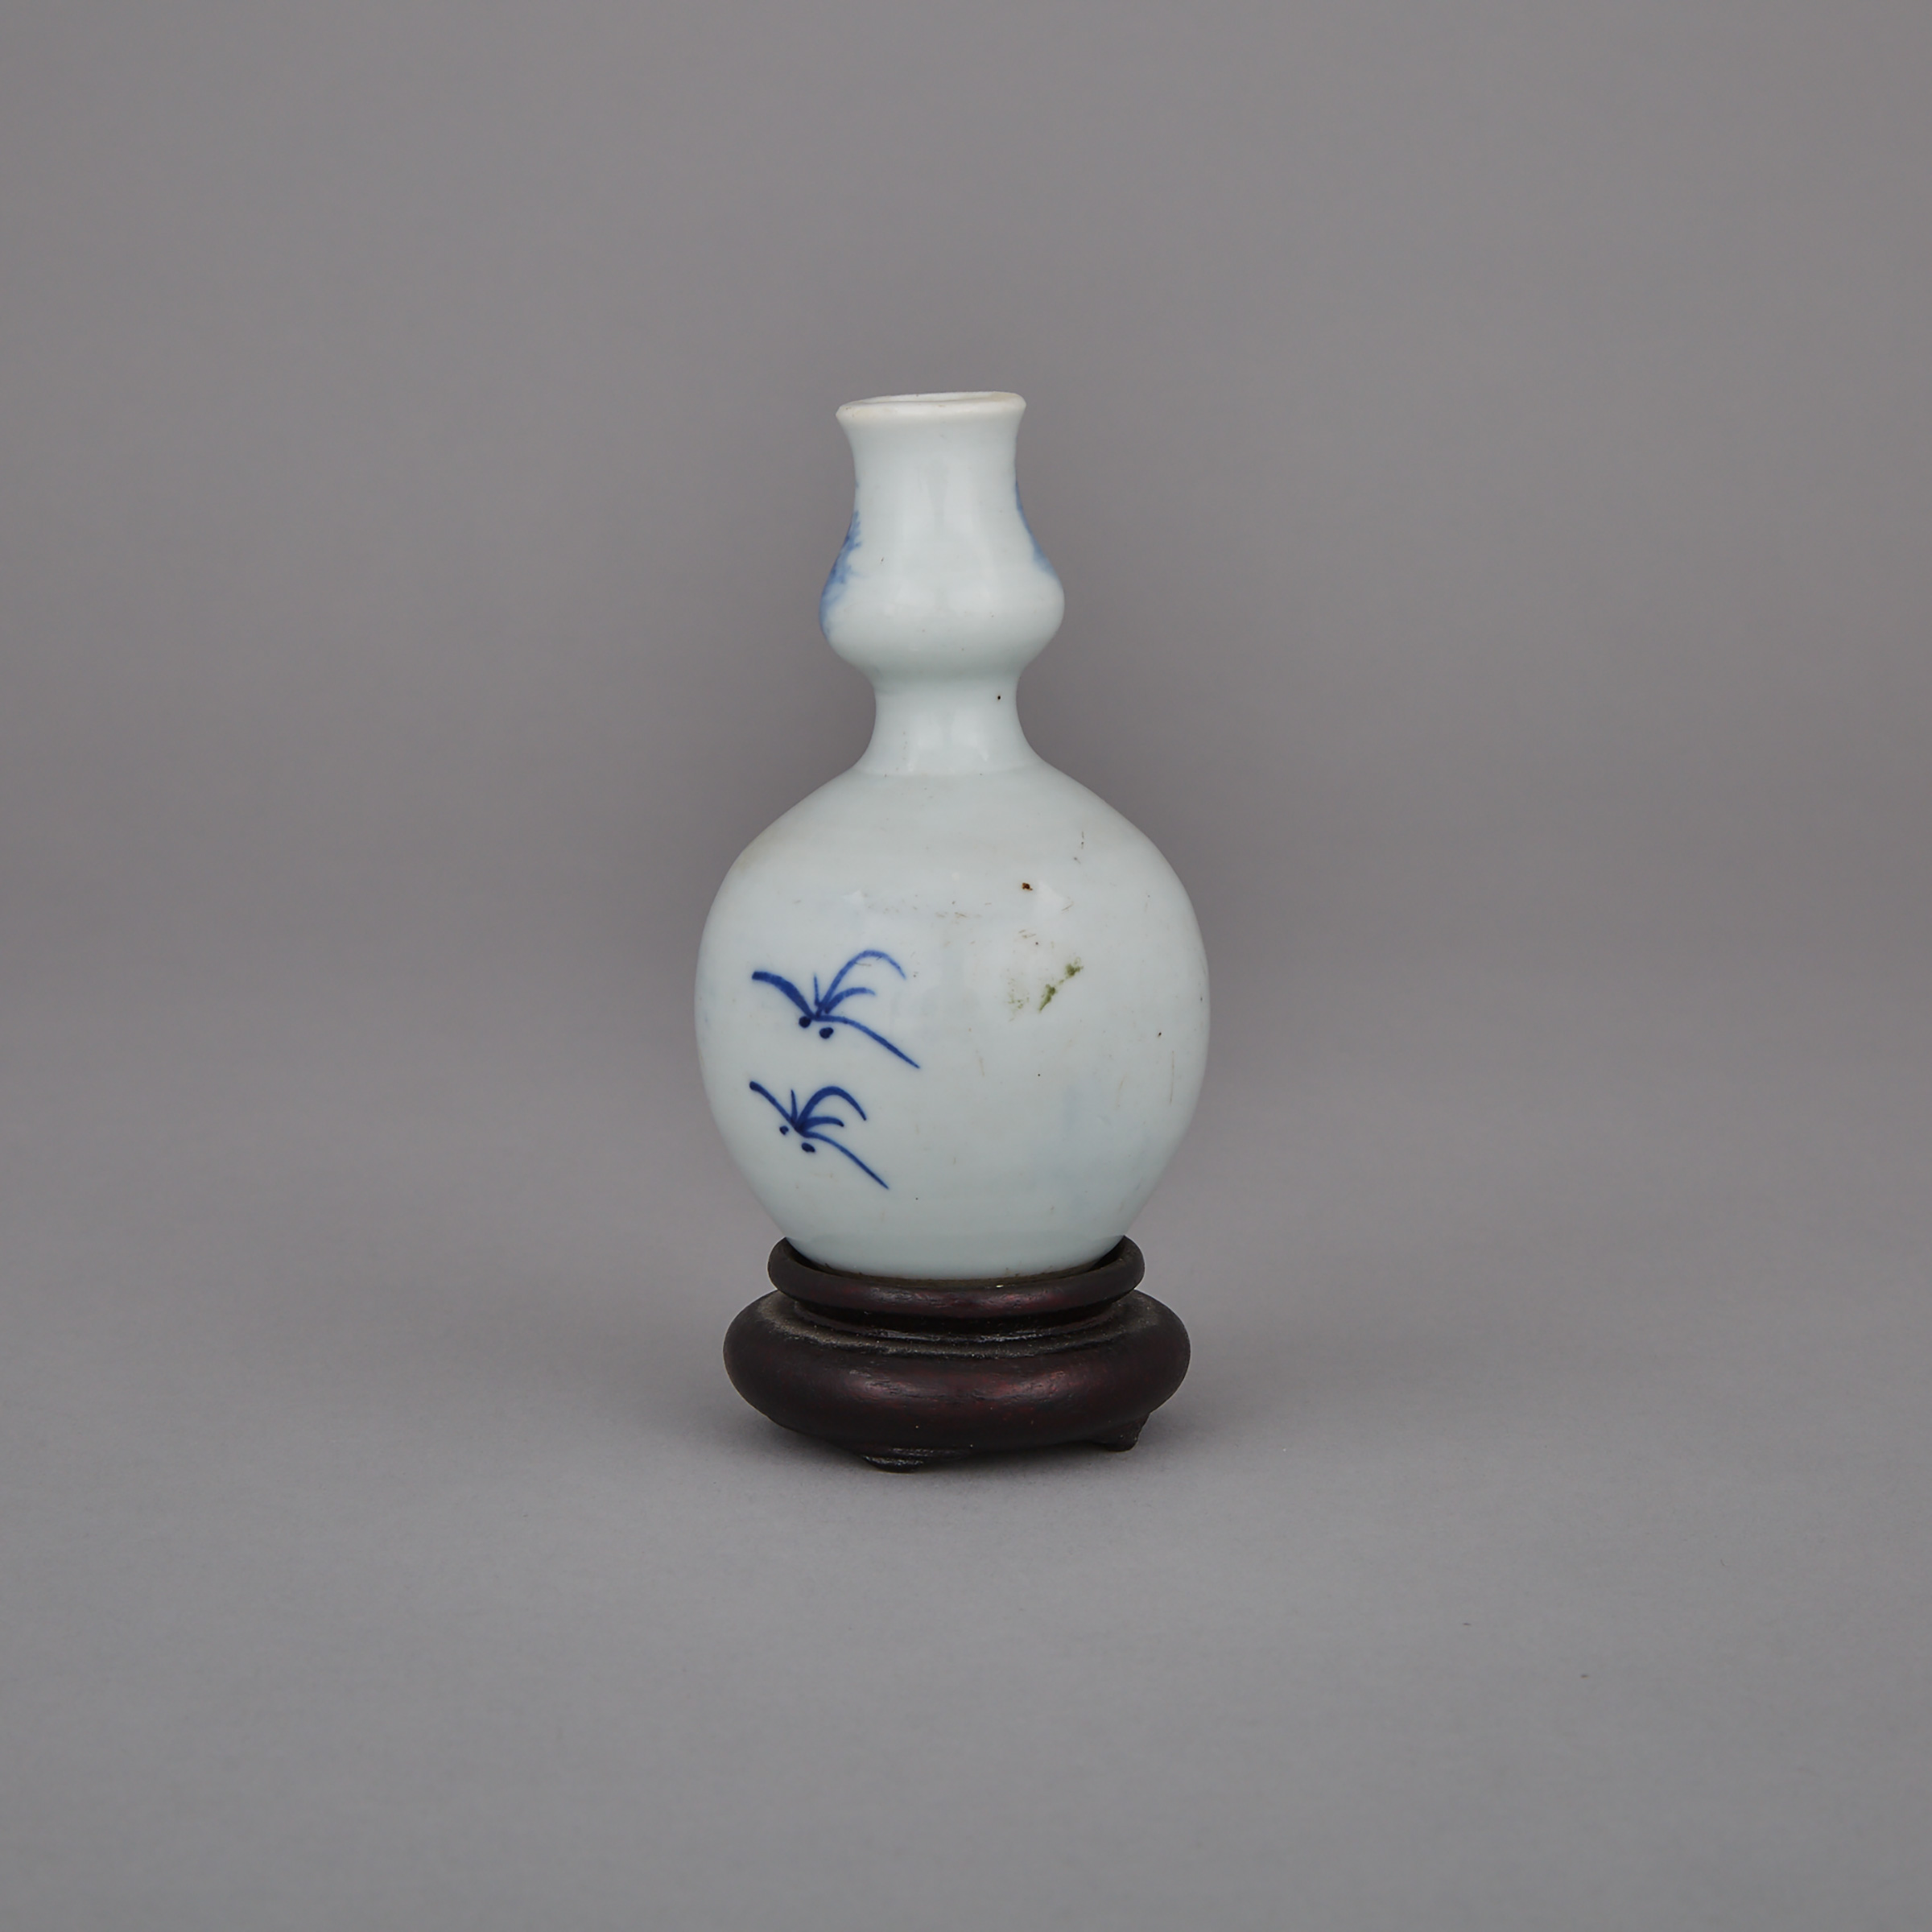 A Blue and White Double Gourd Vase, Qianlong Period (1736-1795)